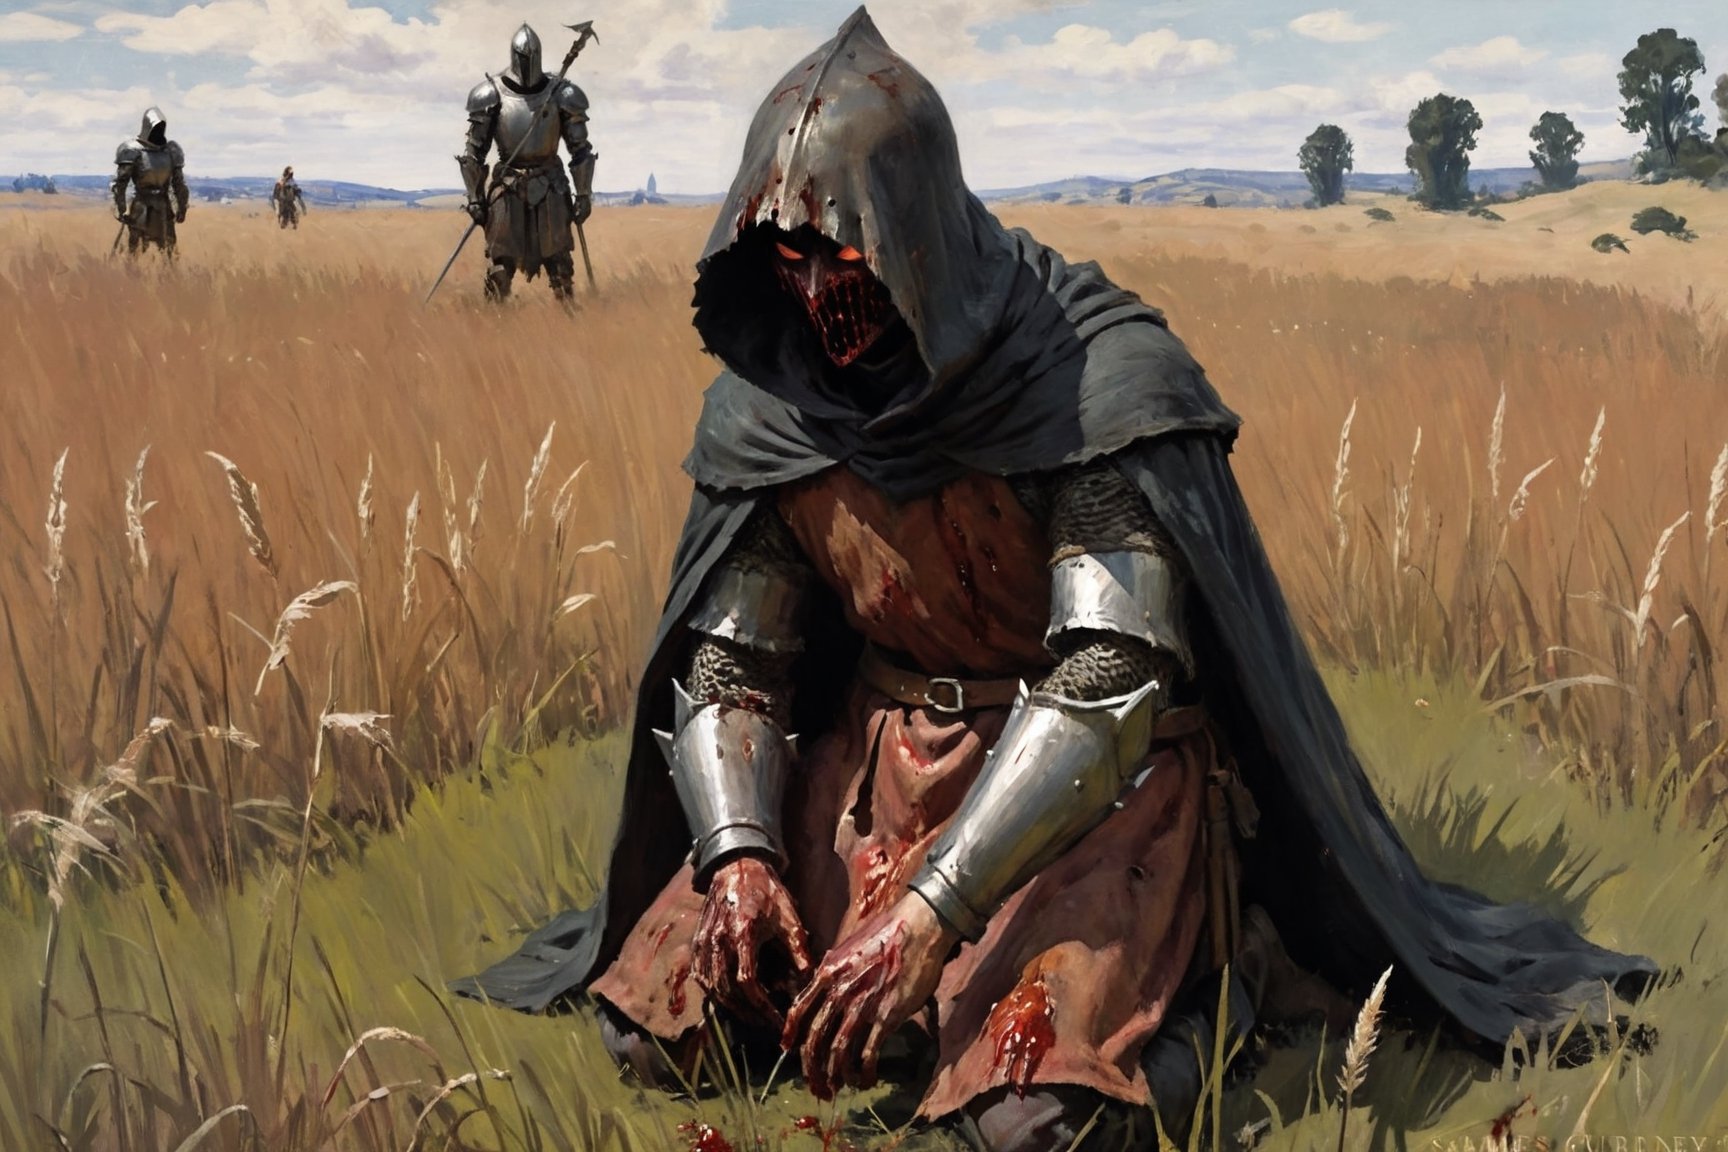 (rusty, tarnished, hood:1.2) knight vast tall grass field with figure kneeling bloody with (hooded, faceplate) figure ,(art by James Gurney), eerie, thick paint, close_up,(art by sargent), starved, robes, , pale, (bloody), Elden_ring, defeated, , medieval, wounded, epic,impressionist painting